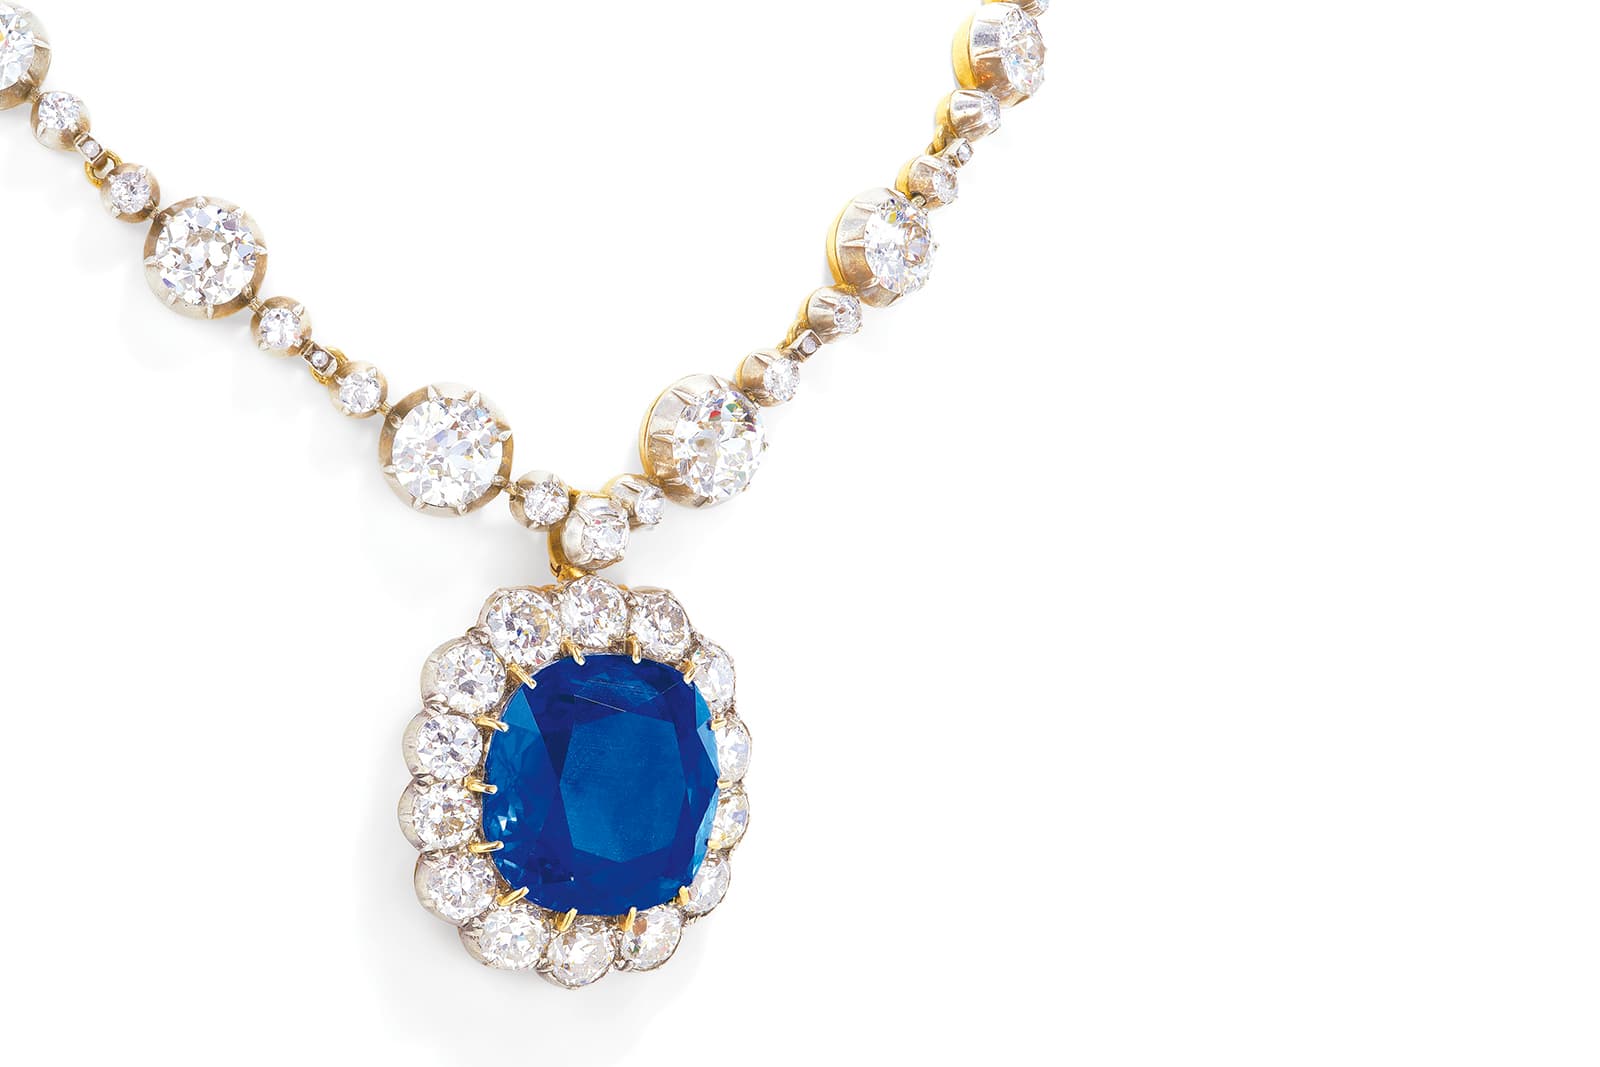 Jewellery of royal provenance at Christie's auction